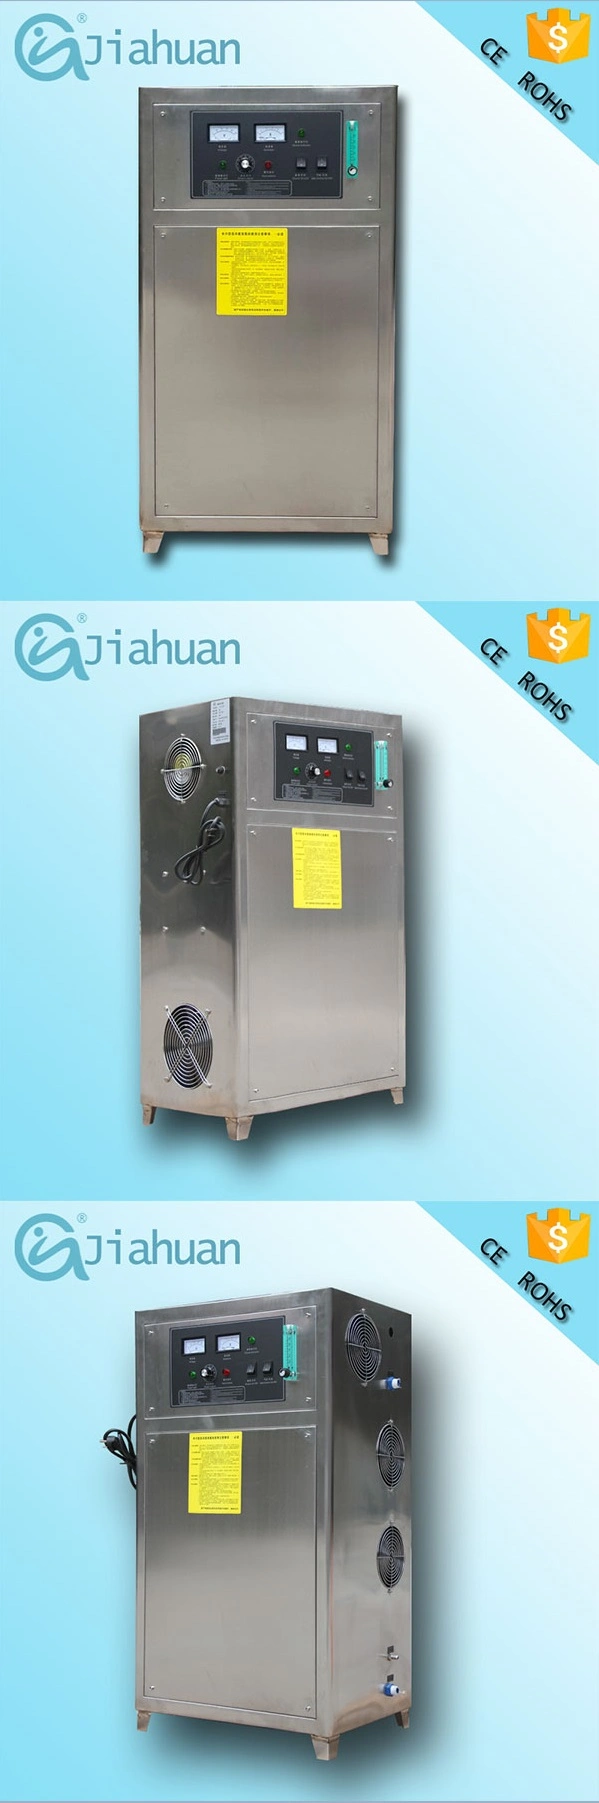 10g/Hr Oxygen Fed Ozone Generator for Water Treatment